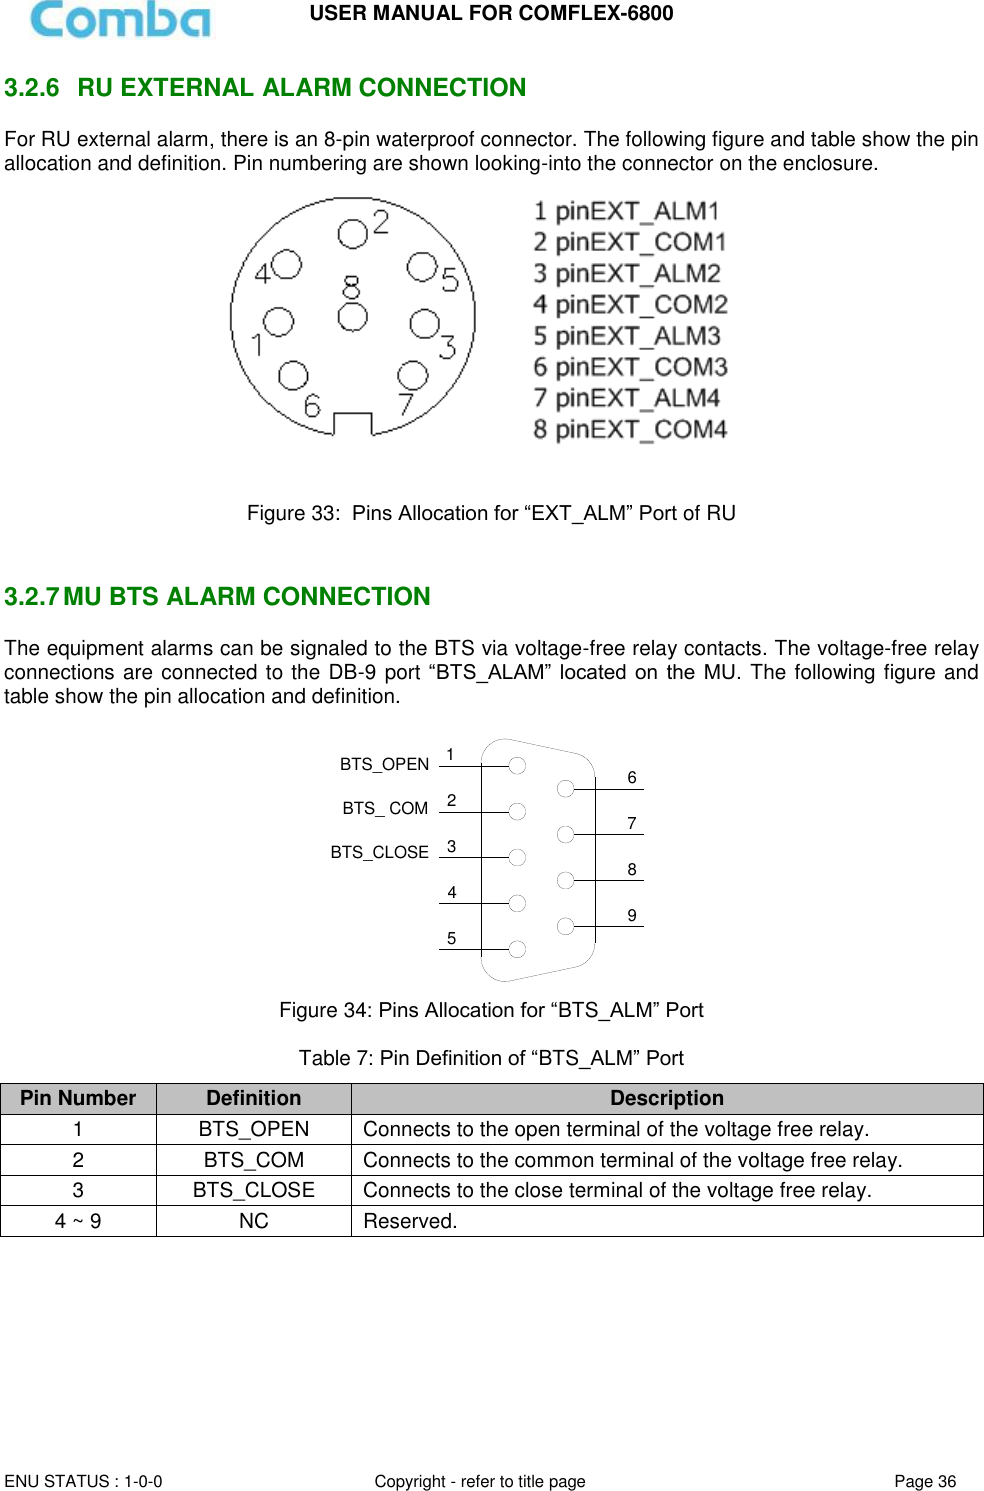 USER MANUAL FOR COMFLEX-6800   ENU STATUS : 1-0-0 Copyright - refer to title page Page 36     3.2.6   RU EXTERNAL ALARM CONNECTION  For RU external alarm, there is an 8-pin waterproof connector. The following figure and table show the pin allocation and definition. Pin numbering are shown looking-into the connector on the enclosure.    Figure 33:  Pins Allocation for “EXT_ALM” Port of RU   3.2.7 MU BTS ALARM CONNECTION The equipment alarms can be signaled to the BTS via voltage-free relay contacts. The voltage-free relay connections are connected to the DB-9 port “BTS_ALAM”  located  on  the  MU.  The following figure and table show the pin allocation and definition.    124356798BTS_OPENBTS_CLOSEBTS_ COM Figure 34: Pins Allocation for “BTS_ALM” Port  Table 7: Pin Definition of “BTS_ALM” Port Pin Number Definition Description 1 BTS_OPEN Connects to the open terminal of the voltage free relay. 2 BTS_COM  Connects to the common terminal of the voltage free relay. 3 BTS_CLOSE Connects to the close terminal of the voltage free relay. 4 ~ 9 NC Reserved.     